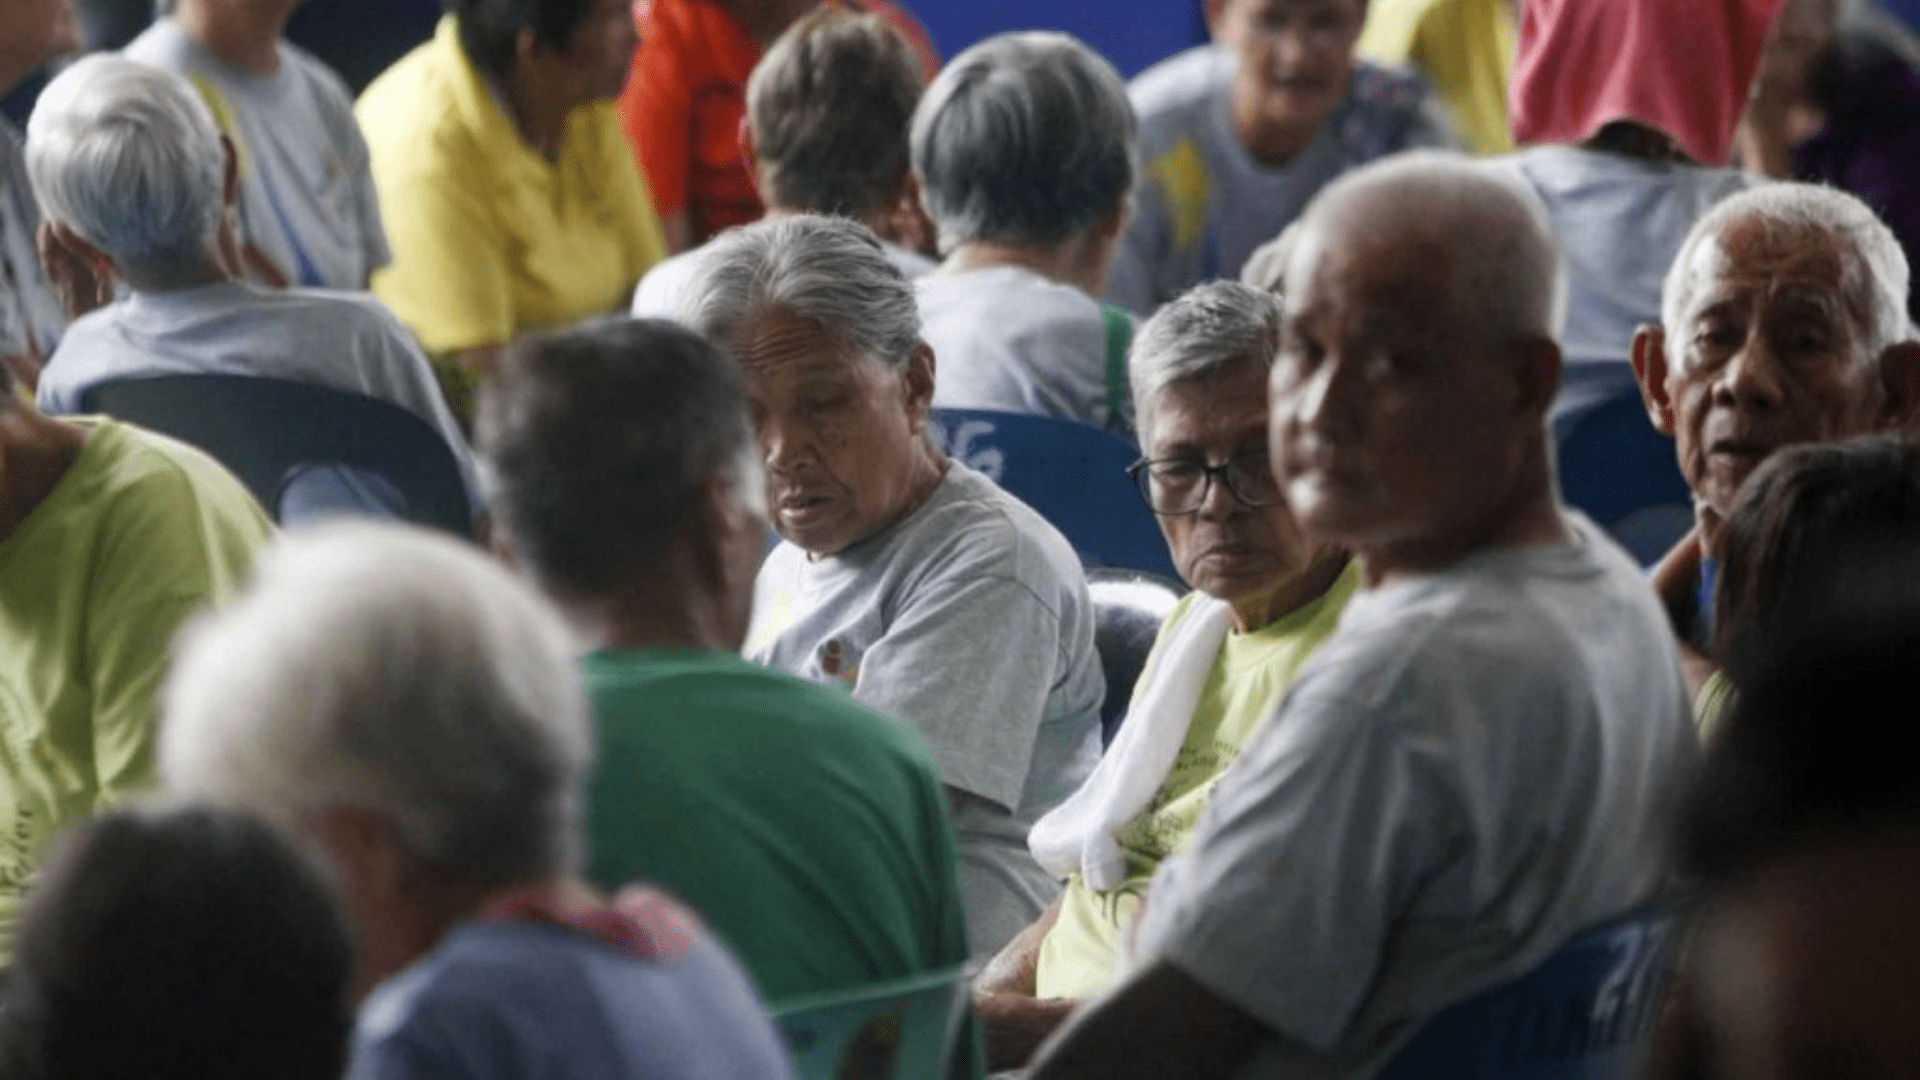 BIR upholds PWD and senior citizen discounts as being required